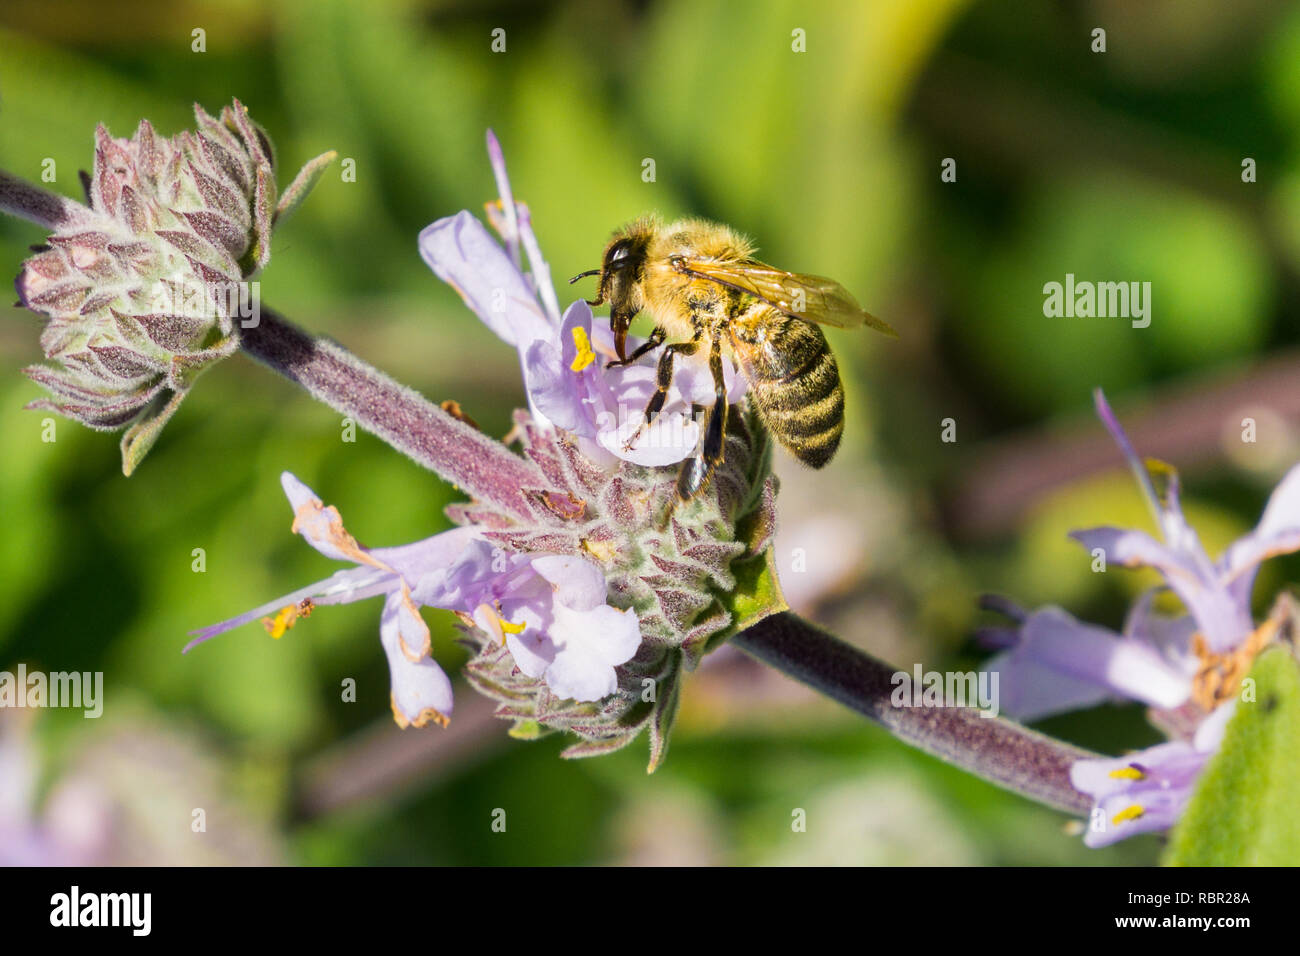 Honey bee gathering nectar from Cleveland sage (Salvia clevelandii) flowers in spring, California Stock Photo